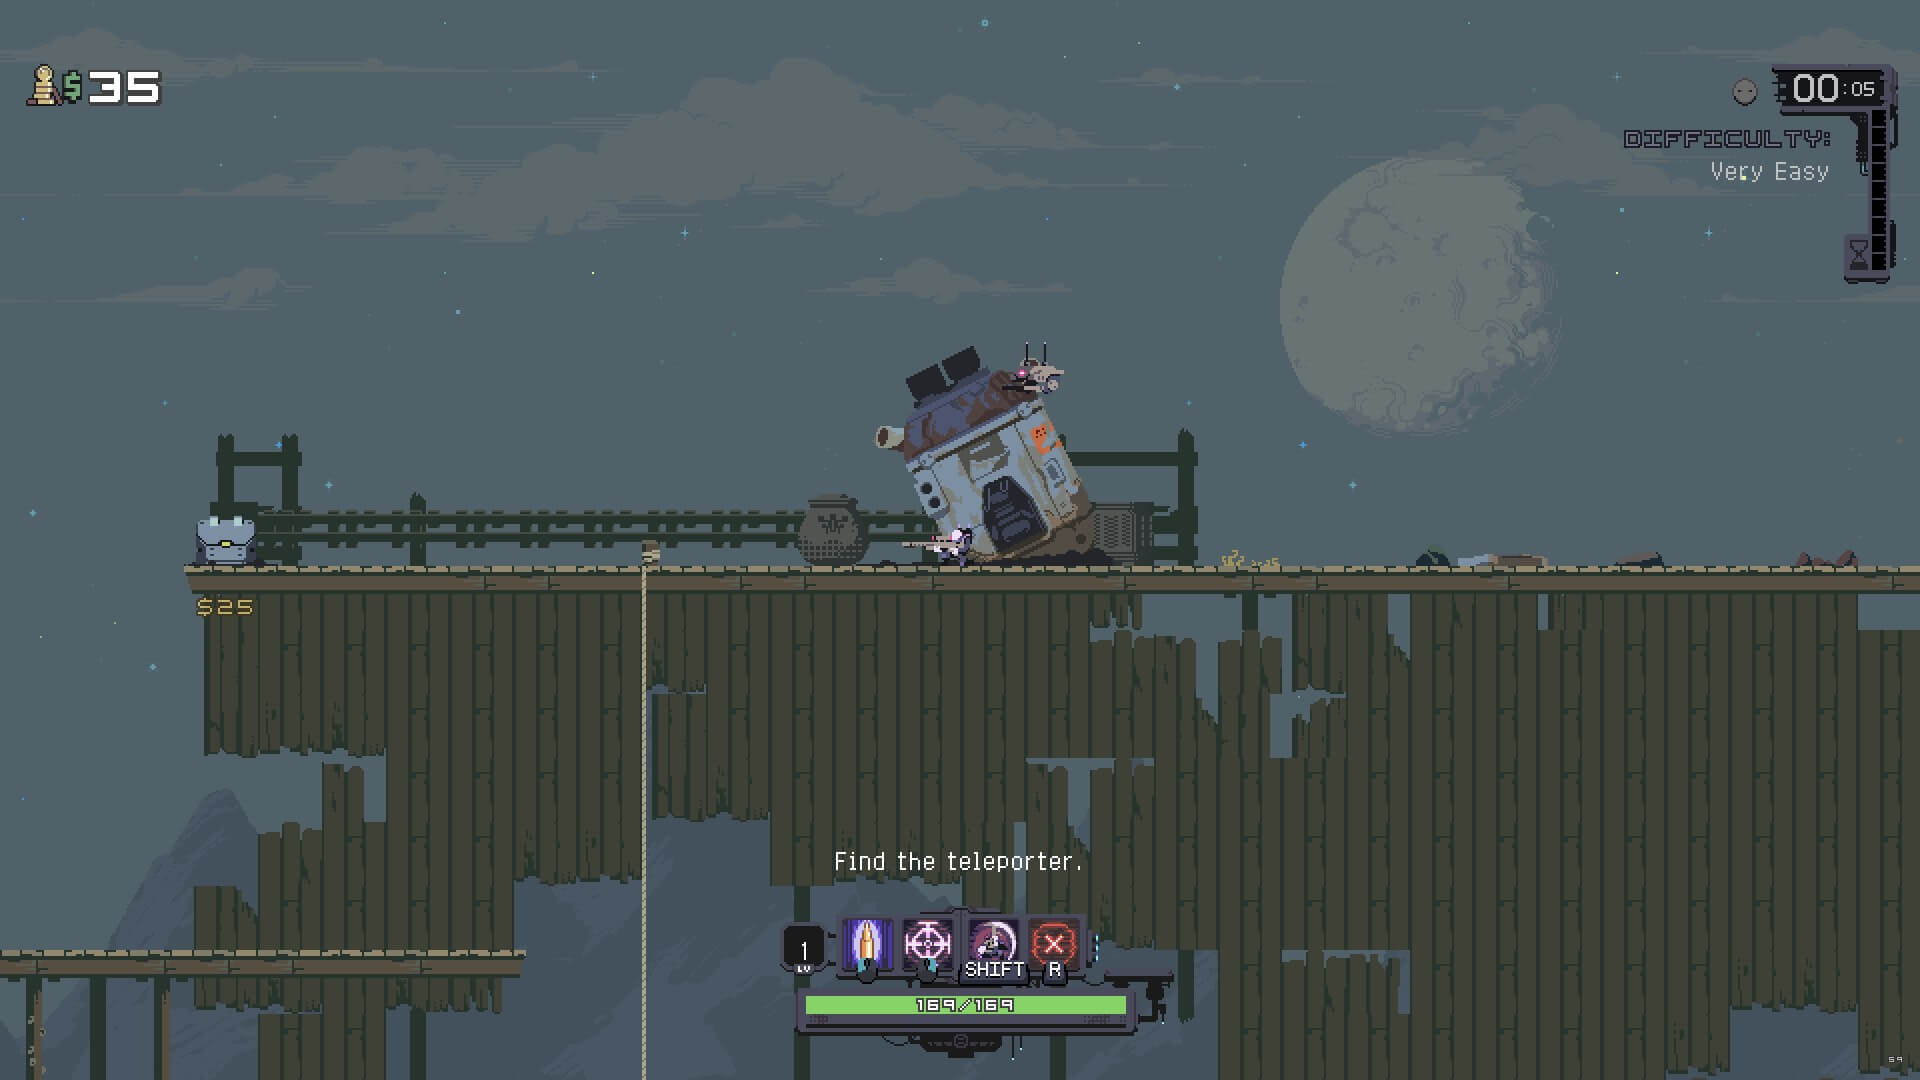 The sniper survivor lands on a wooden platform that is sturdy enough to take a capsule with the full force of entry with only a bit of dirt. A old looking pot near the entry point and a chest with the price of opening being $25. The sight of the moon seeming larger than anyone would be comfortable with.